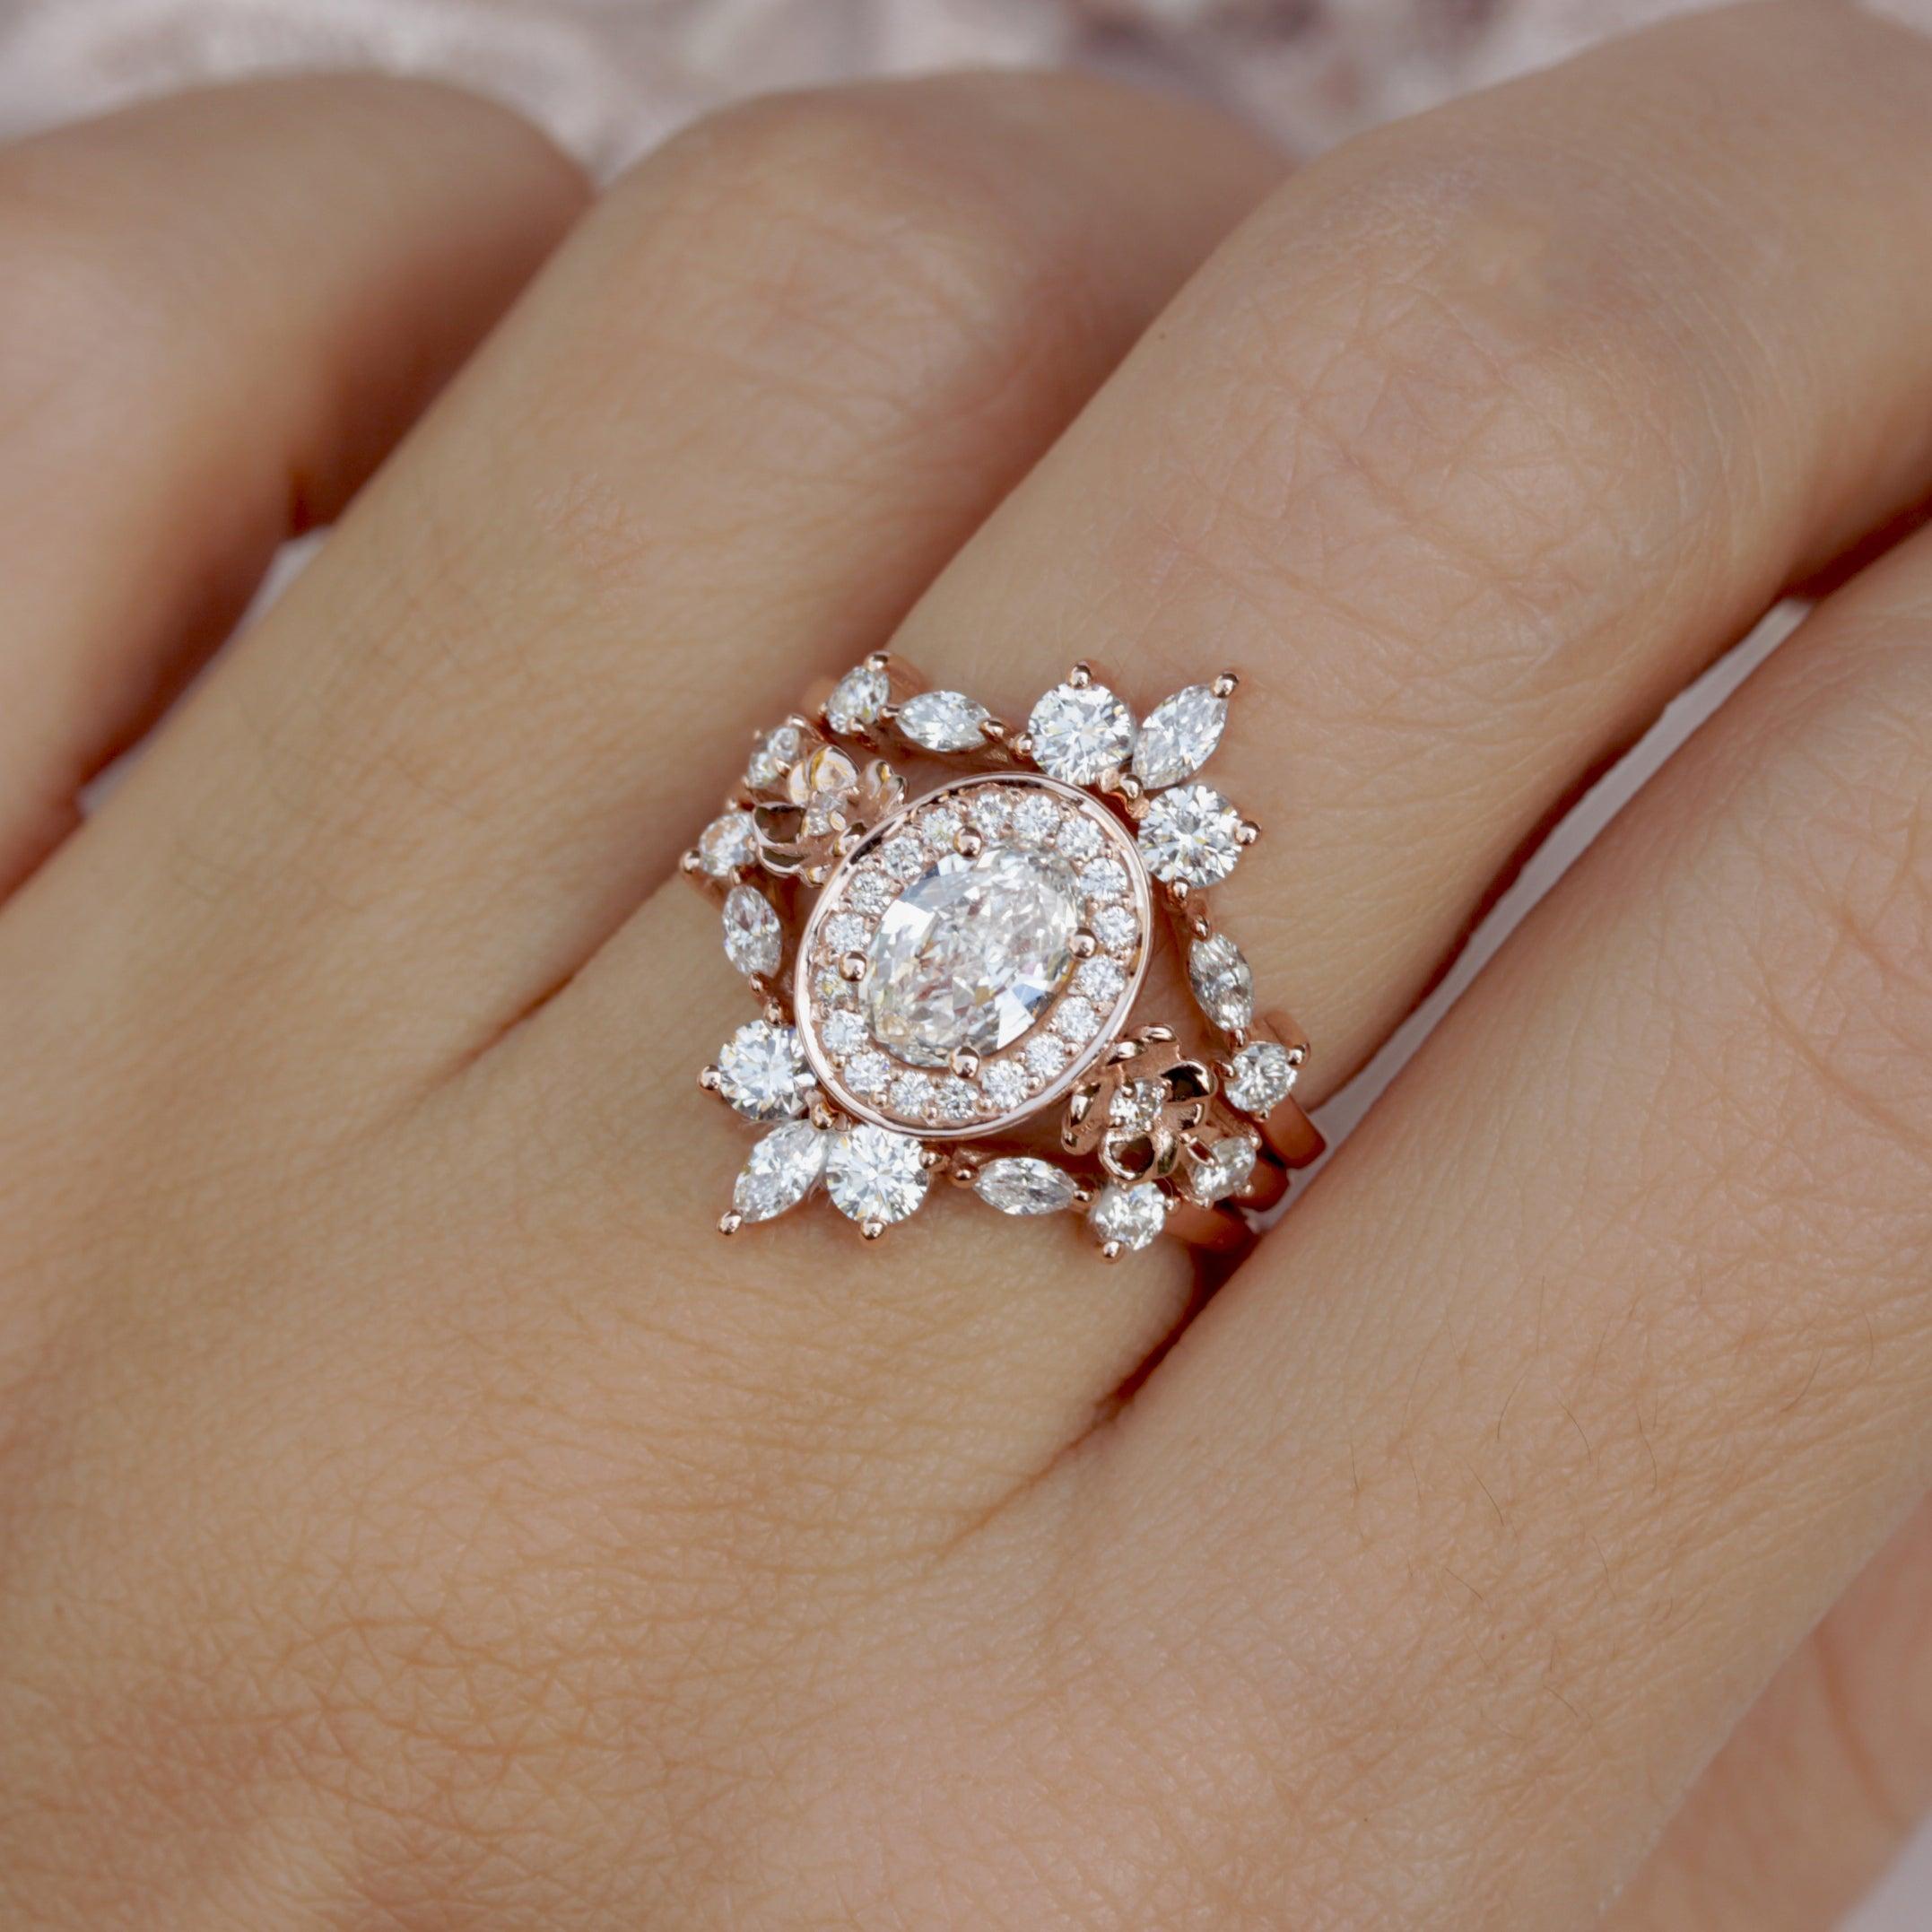 Oval Halo Diamond Floral Engagement Ring - 